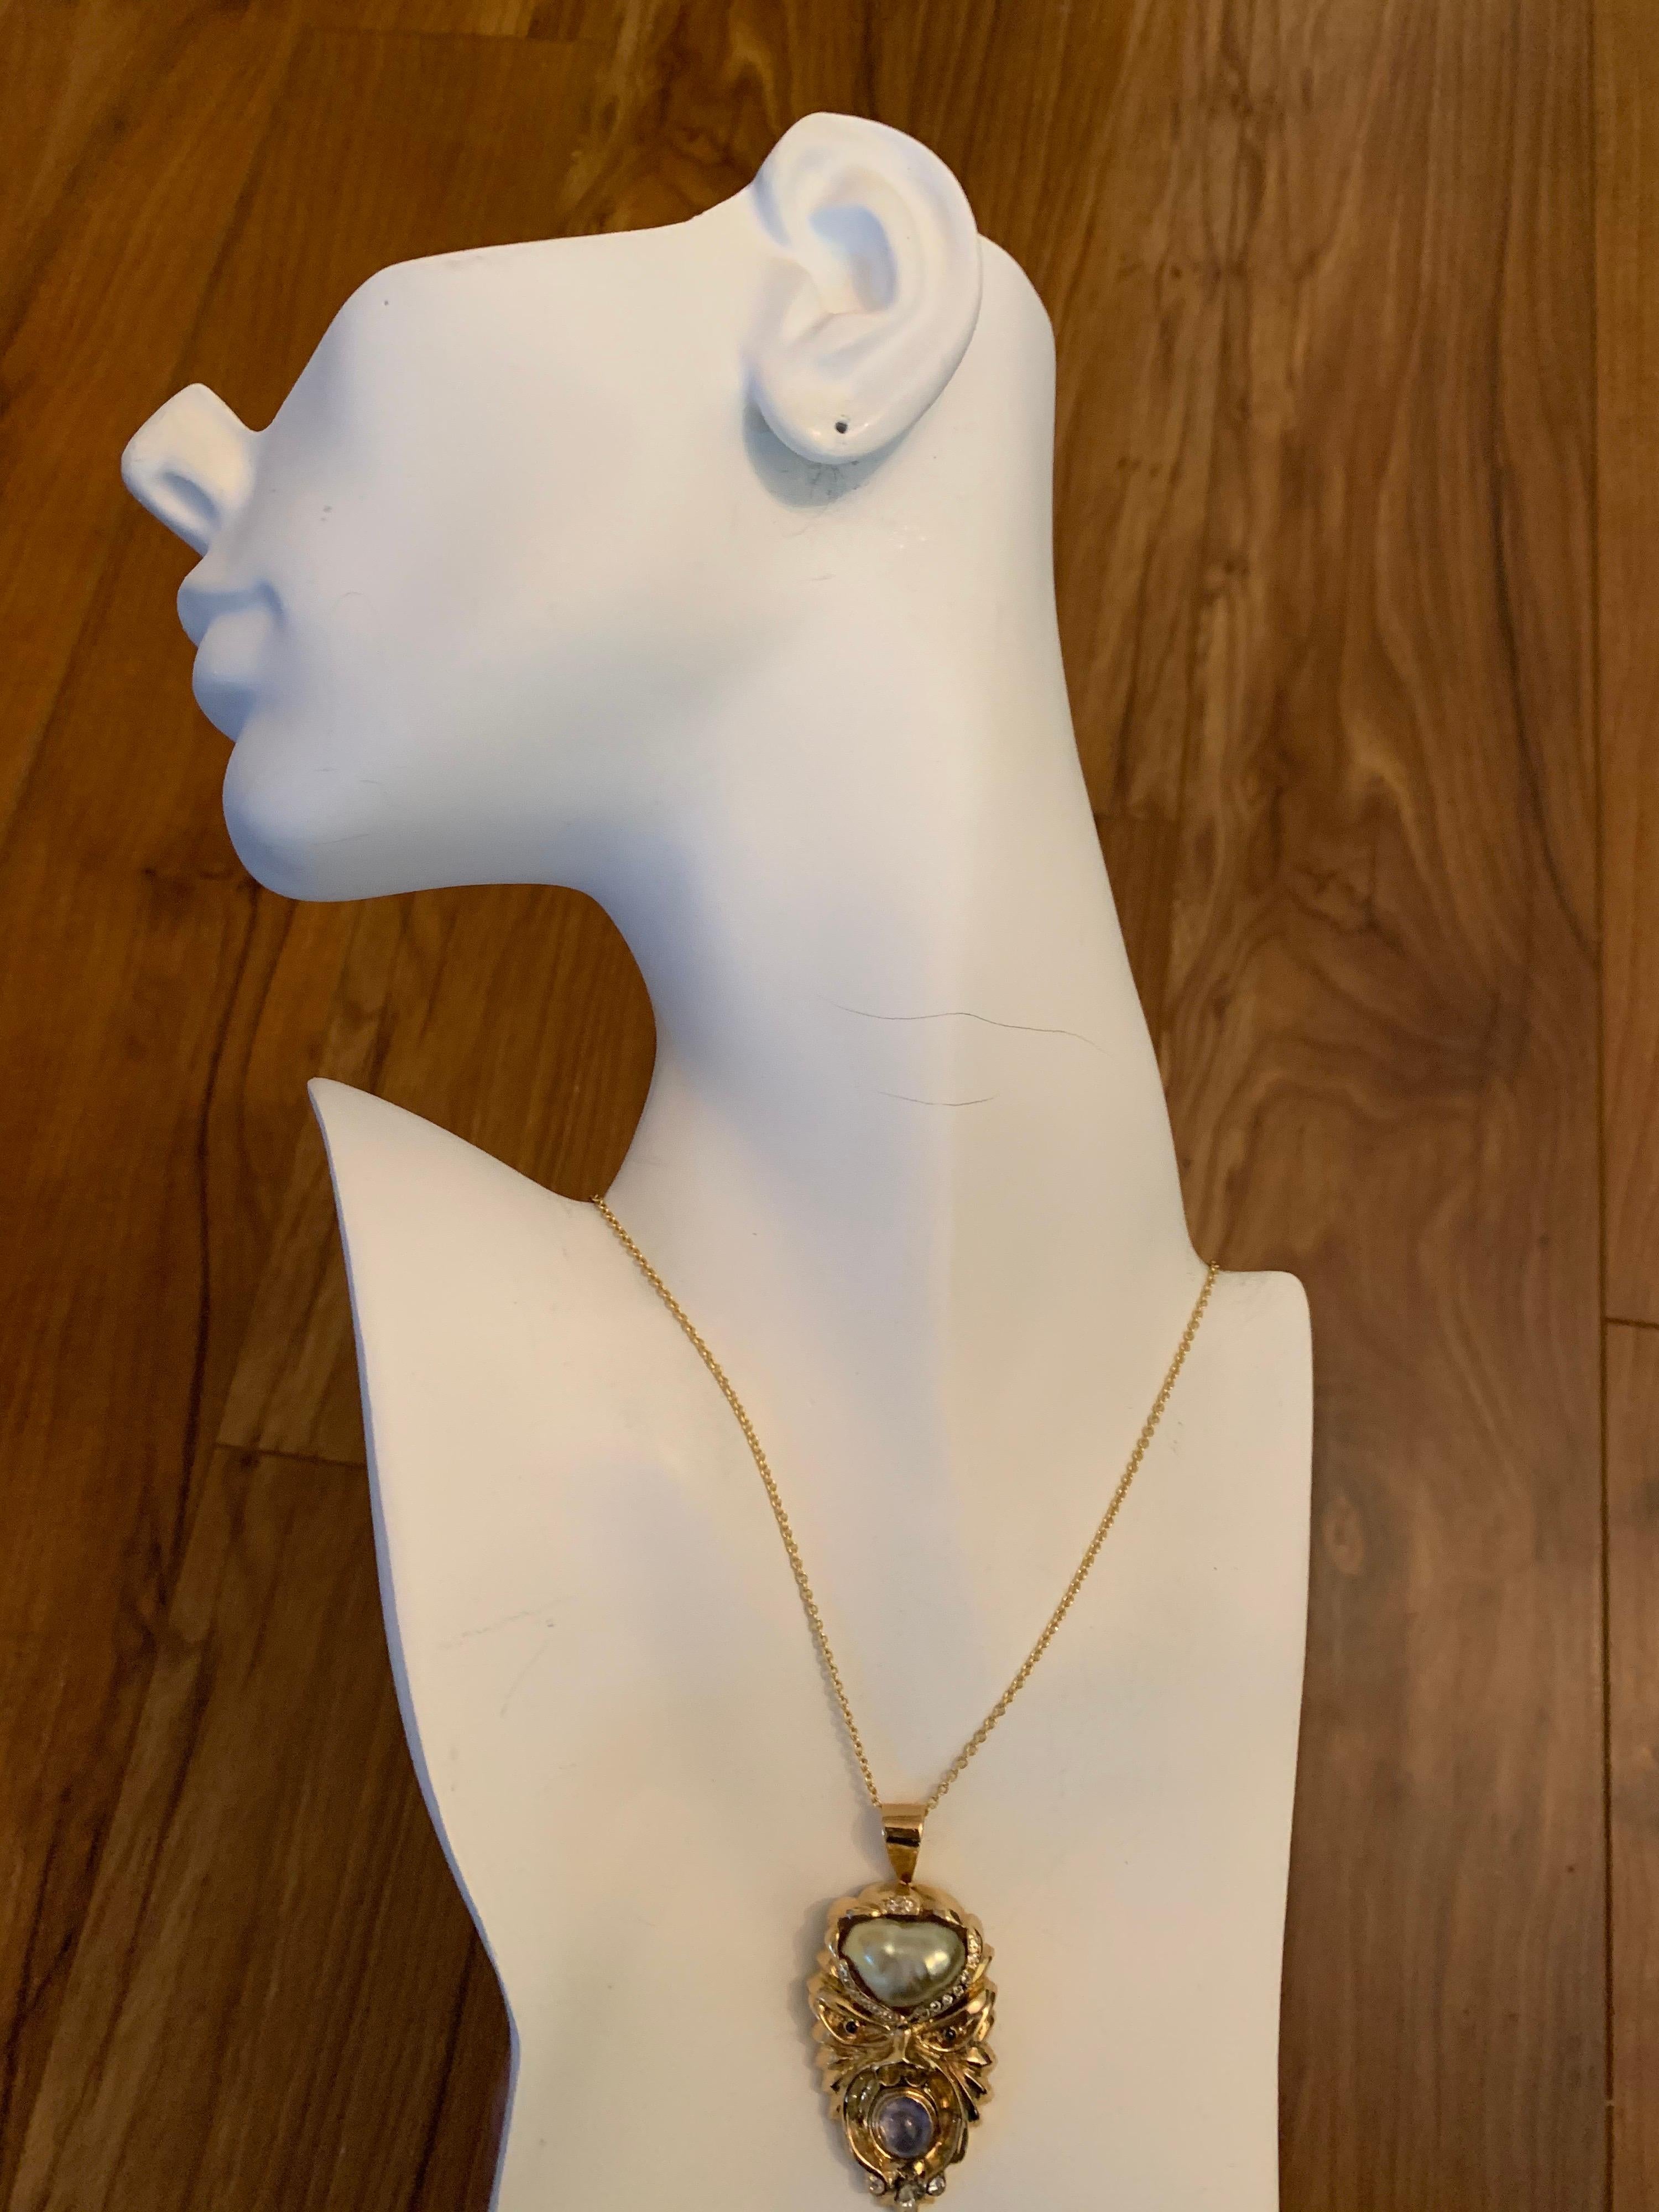 Retro 14k Yellow Gold Warrior Head Natural Pearl, Diamond & Sapphire Pendant. 

The pearl is approximately 17x12mm, the blue sapphire cabochon is 8.5mm. It includes 17 natural round brilliant and 1 marquise shaped diamond weighing approximately 0.30